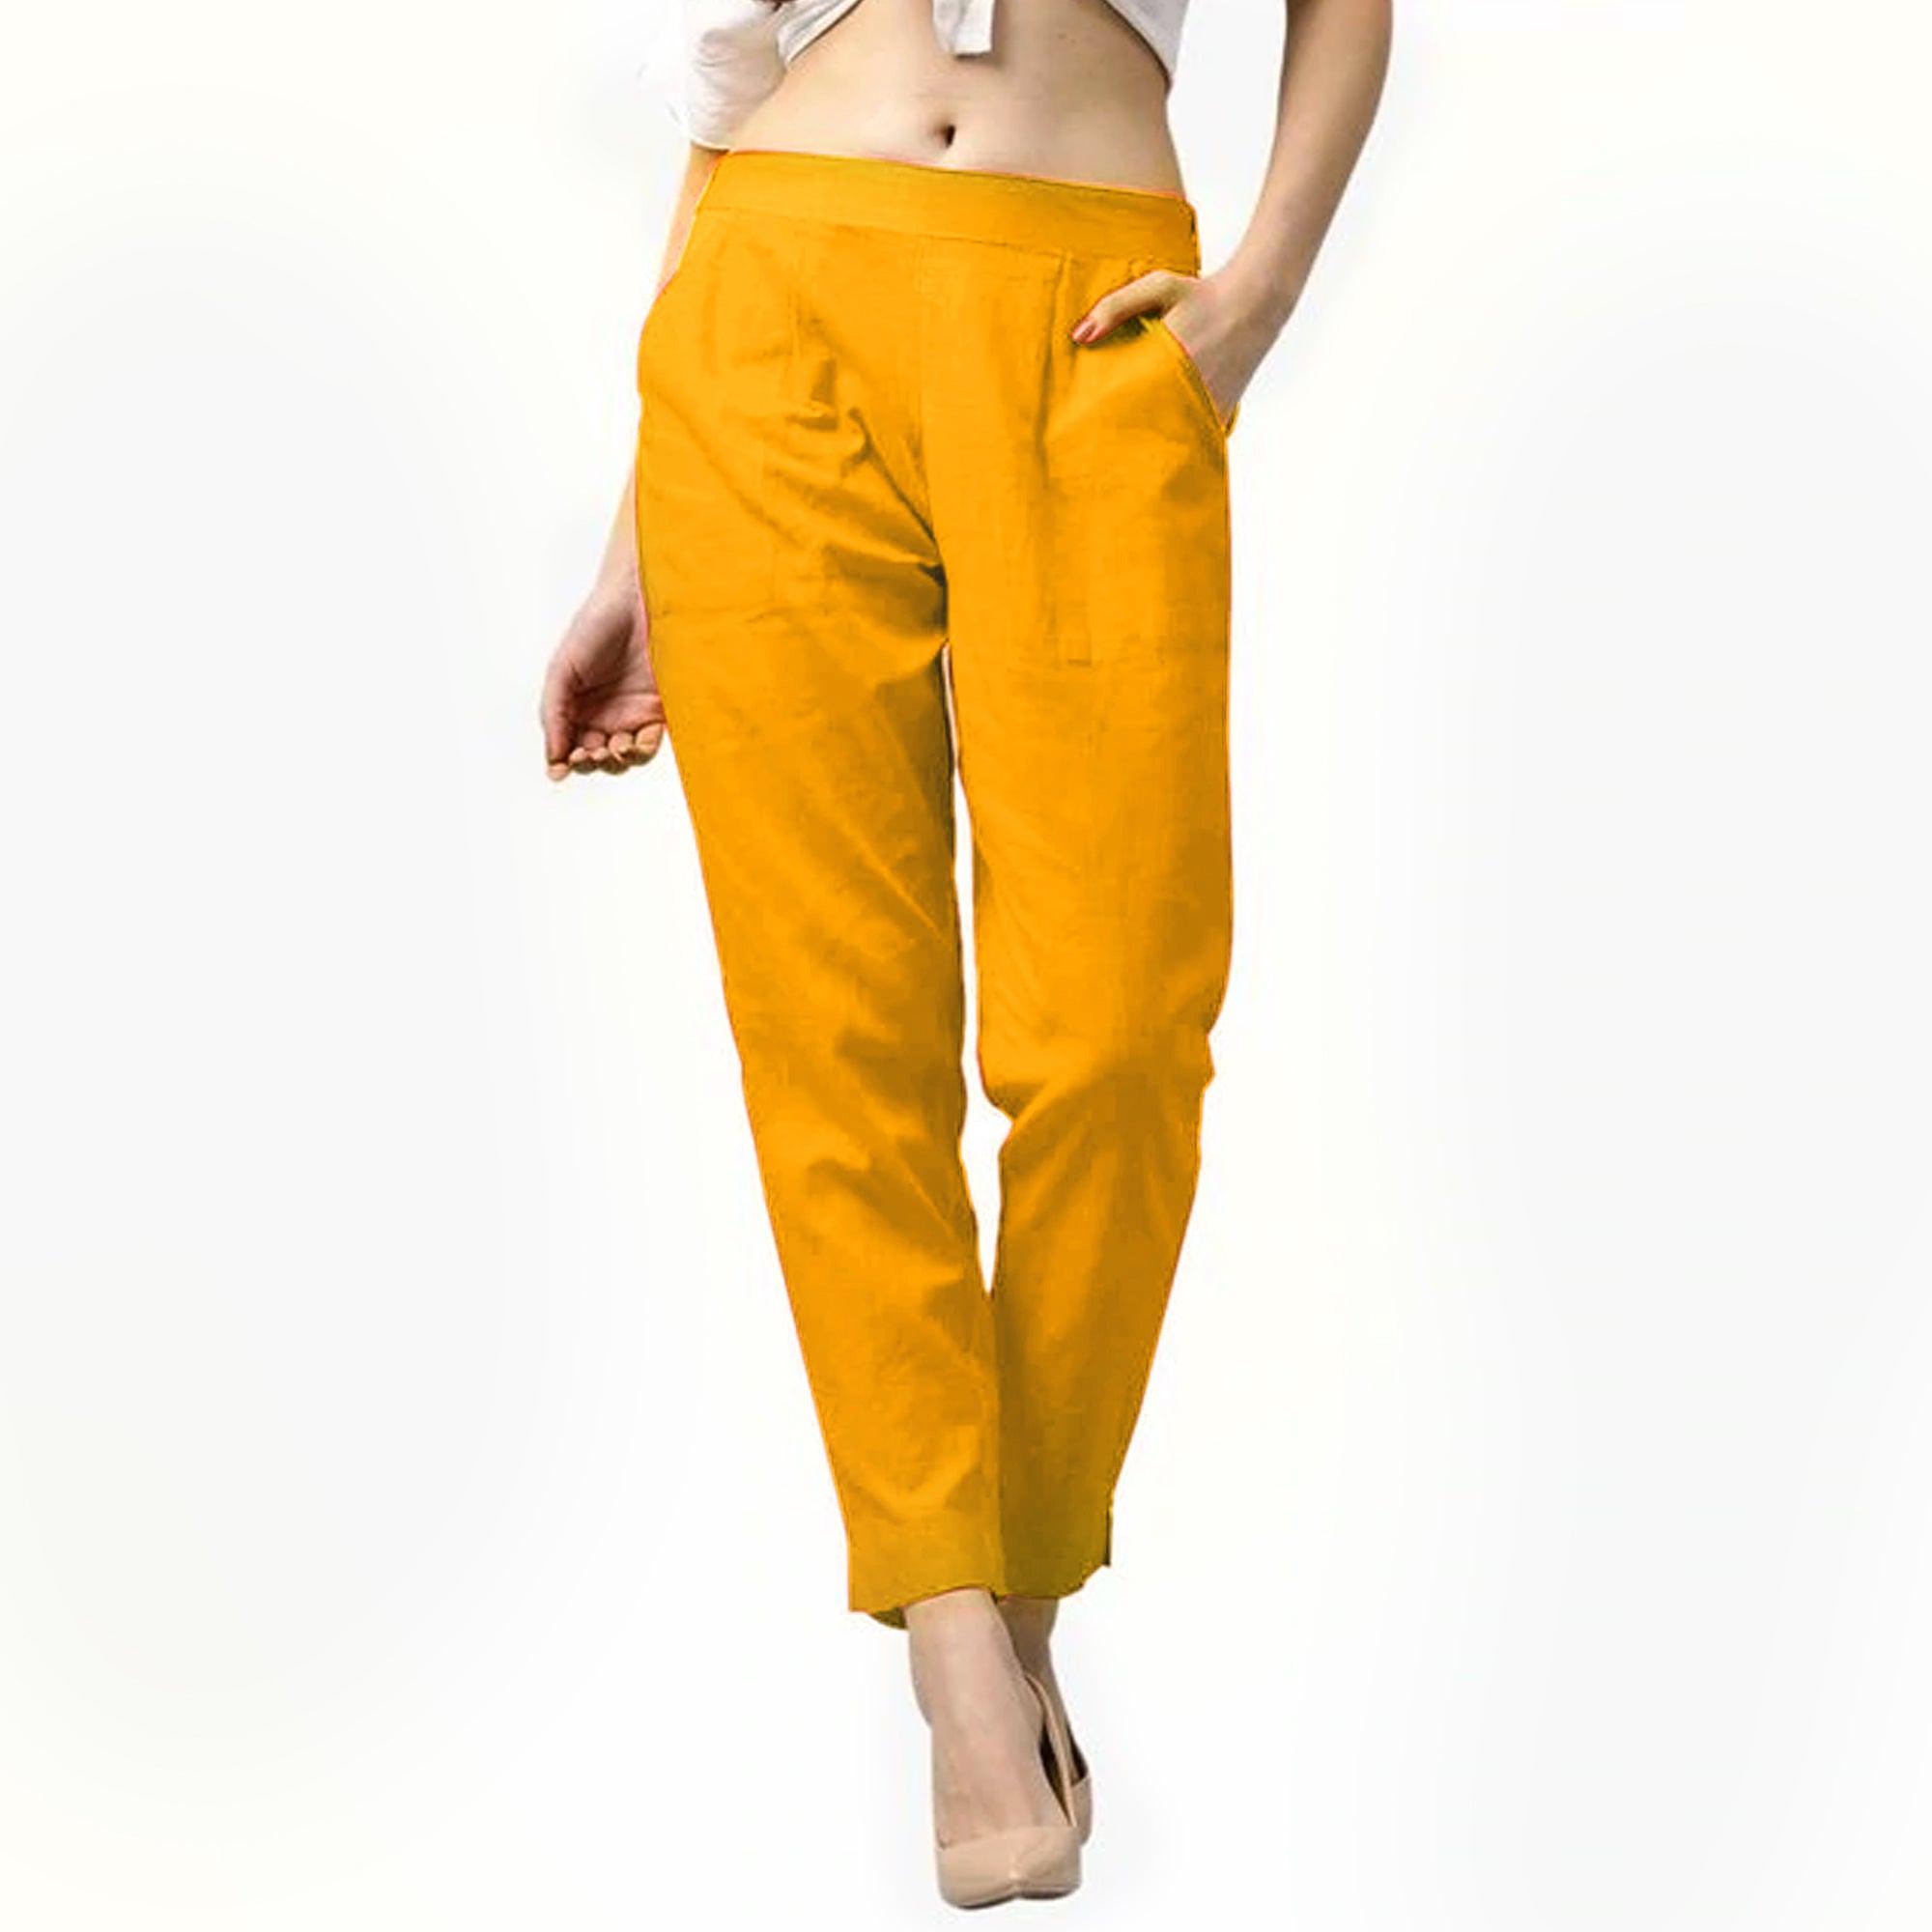 Pleasance Mustard Yellow Colored Casual Wear Cotton Pant - Peachmode